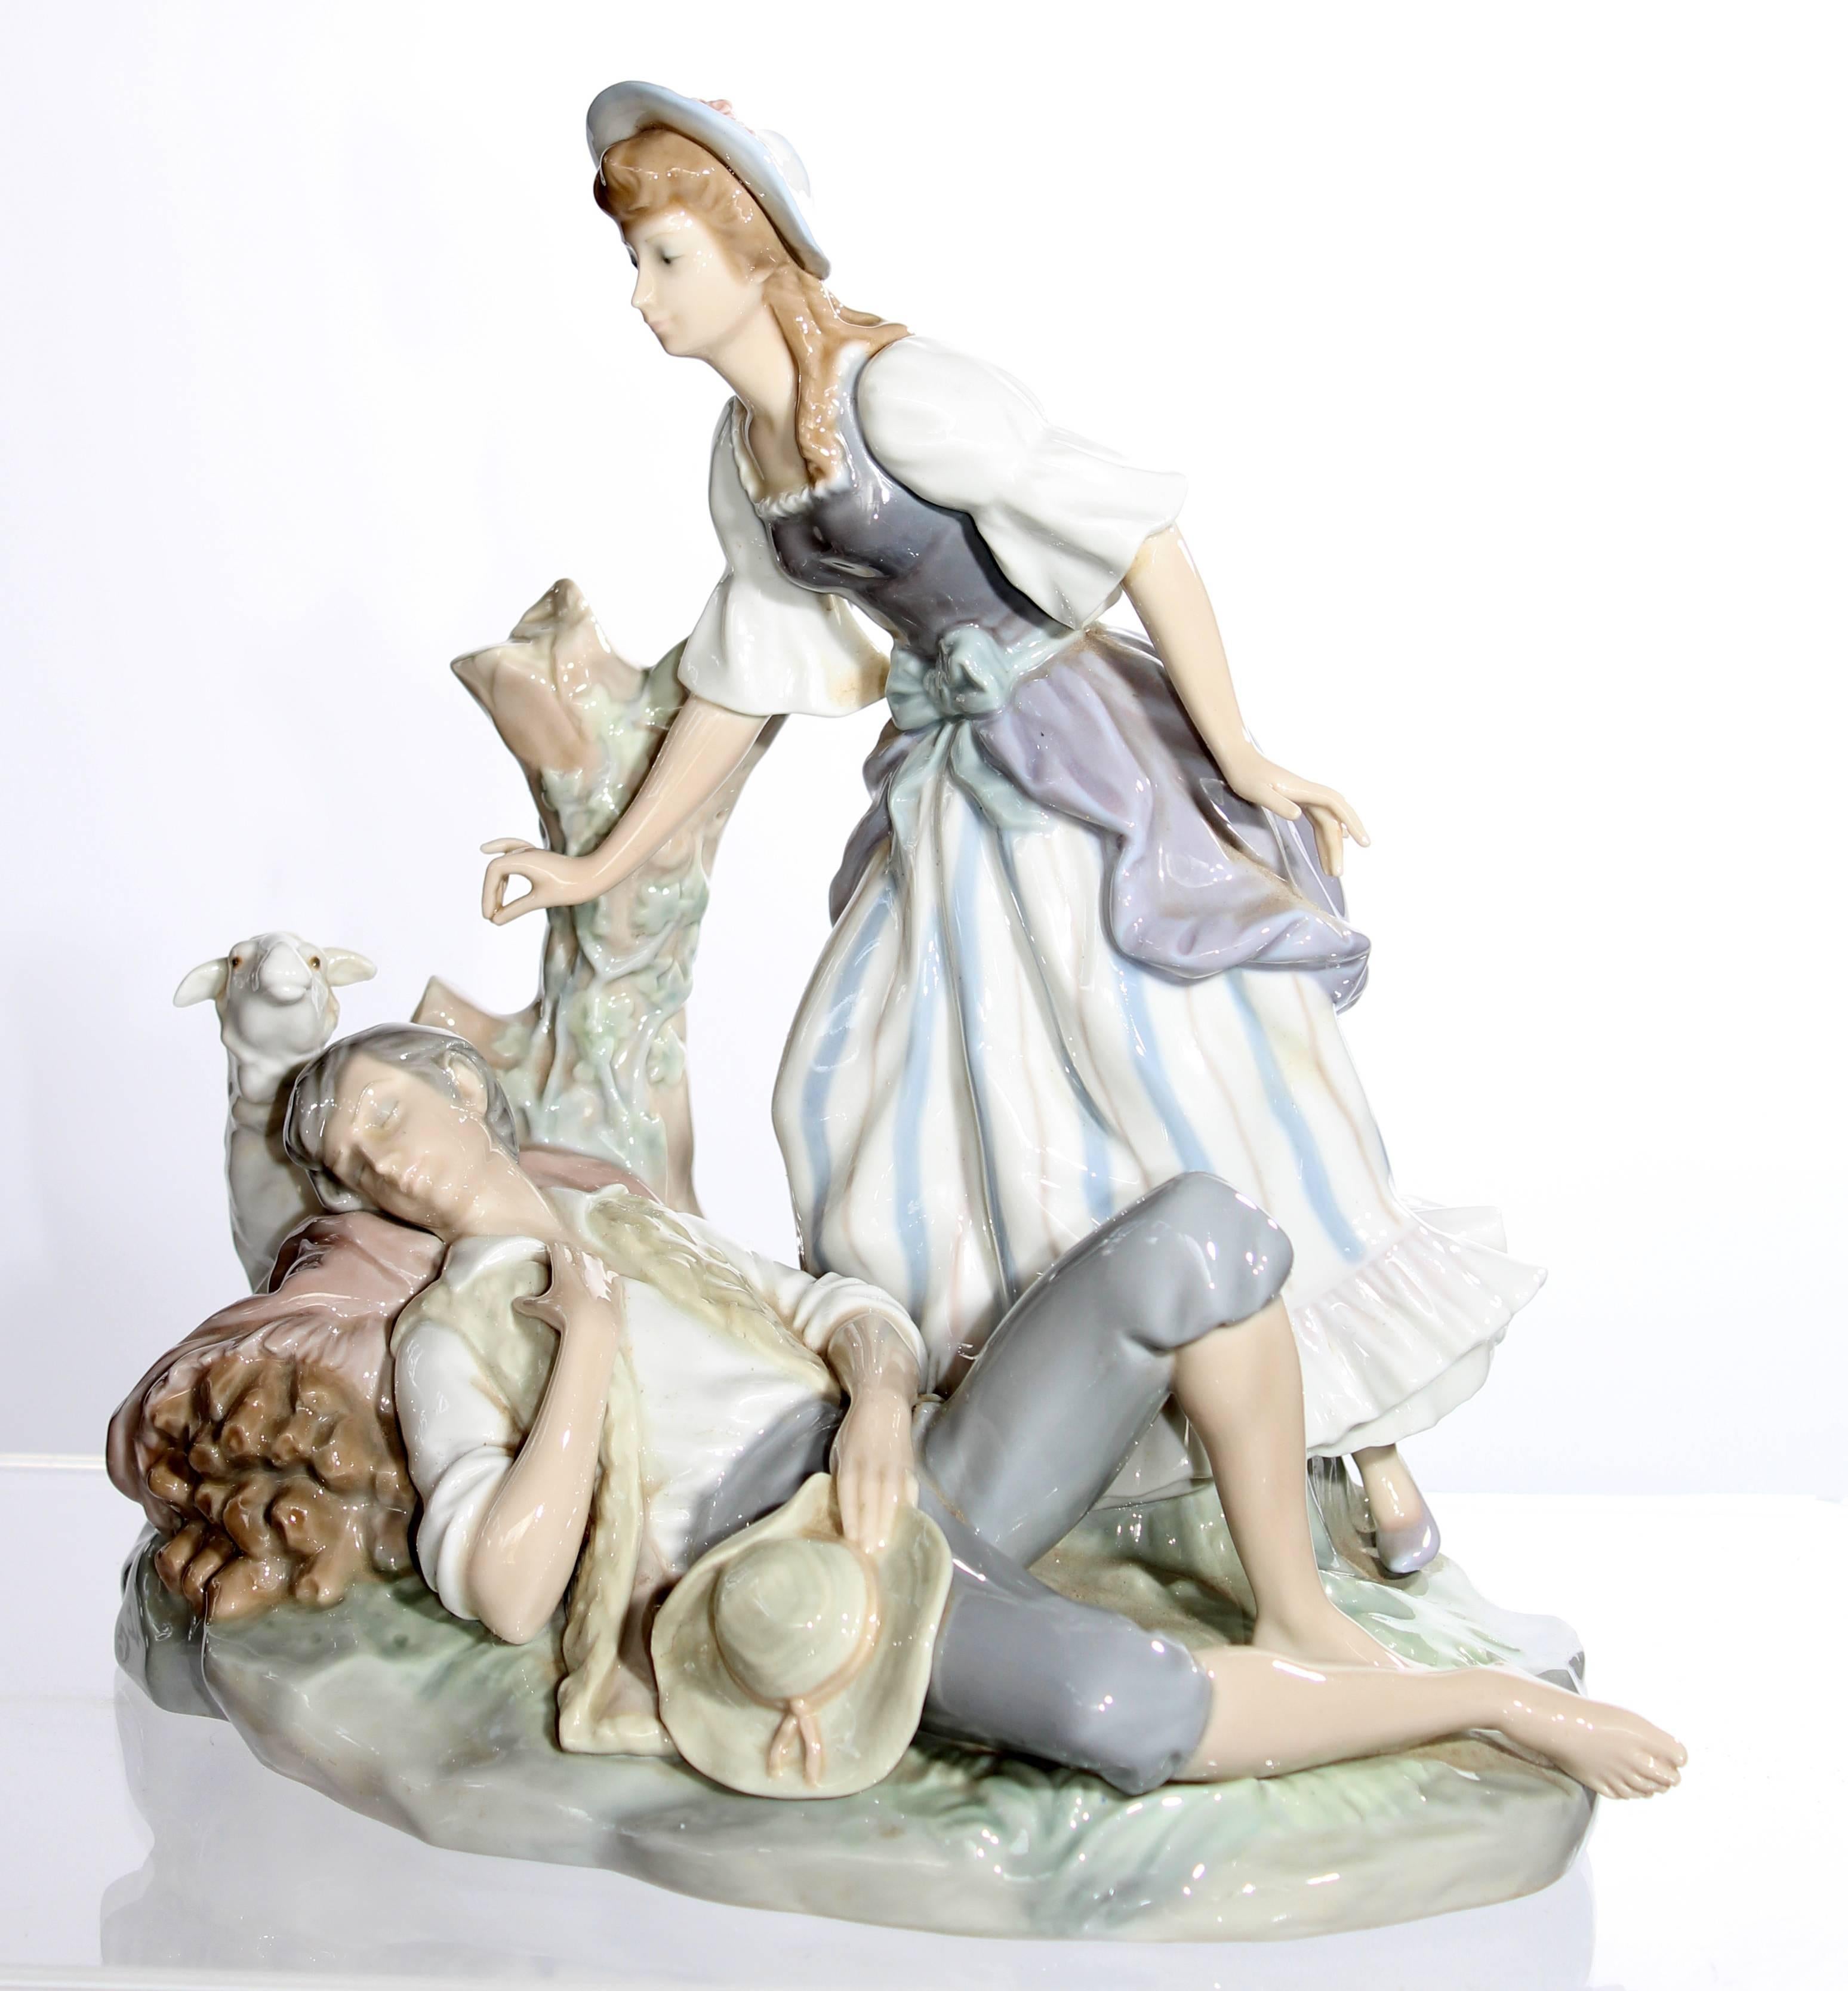 Lladro porcelain sculpture representing a woman leaning over a sleeping man with sheep.